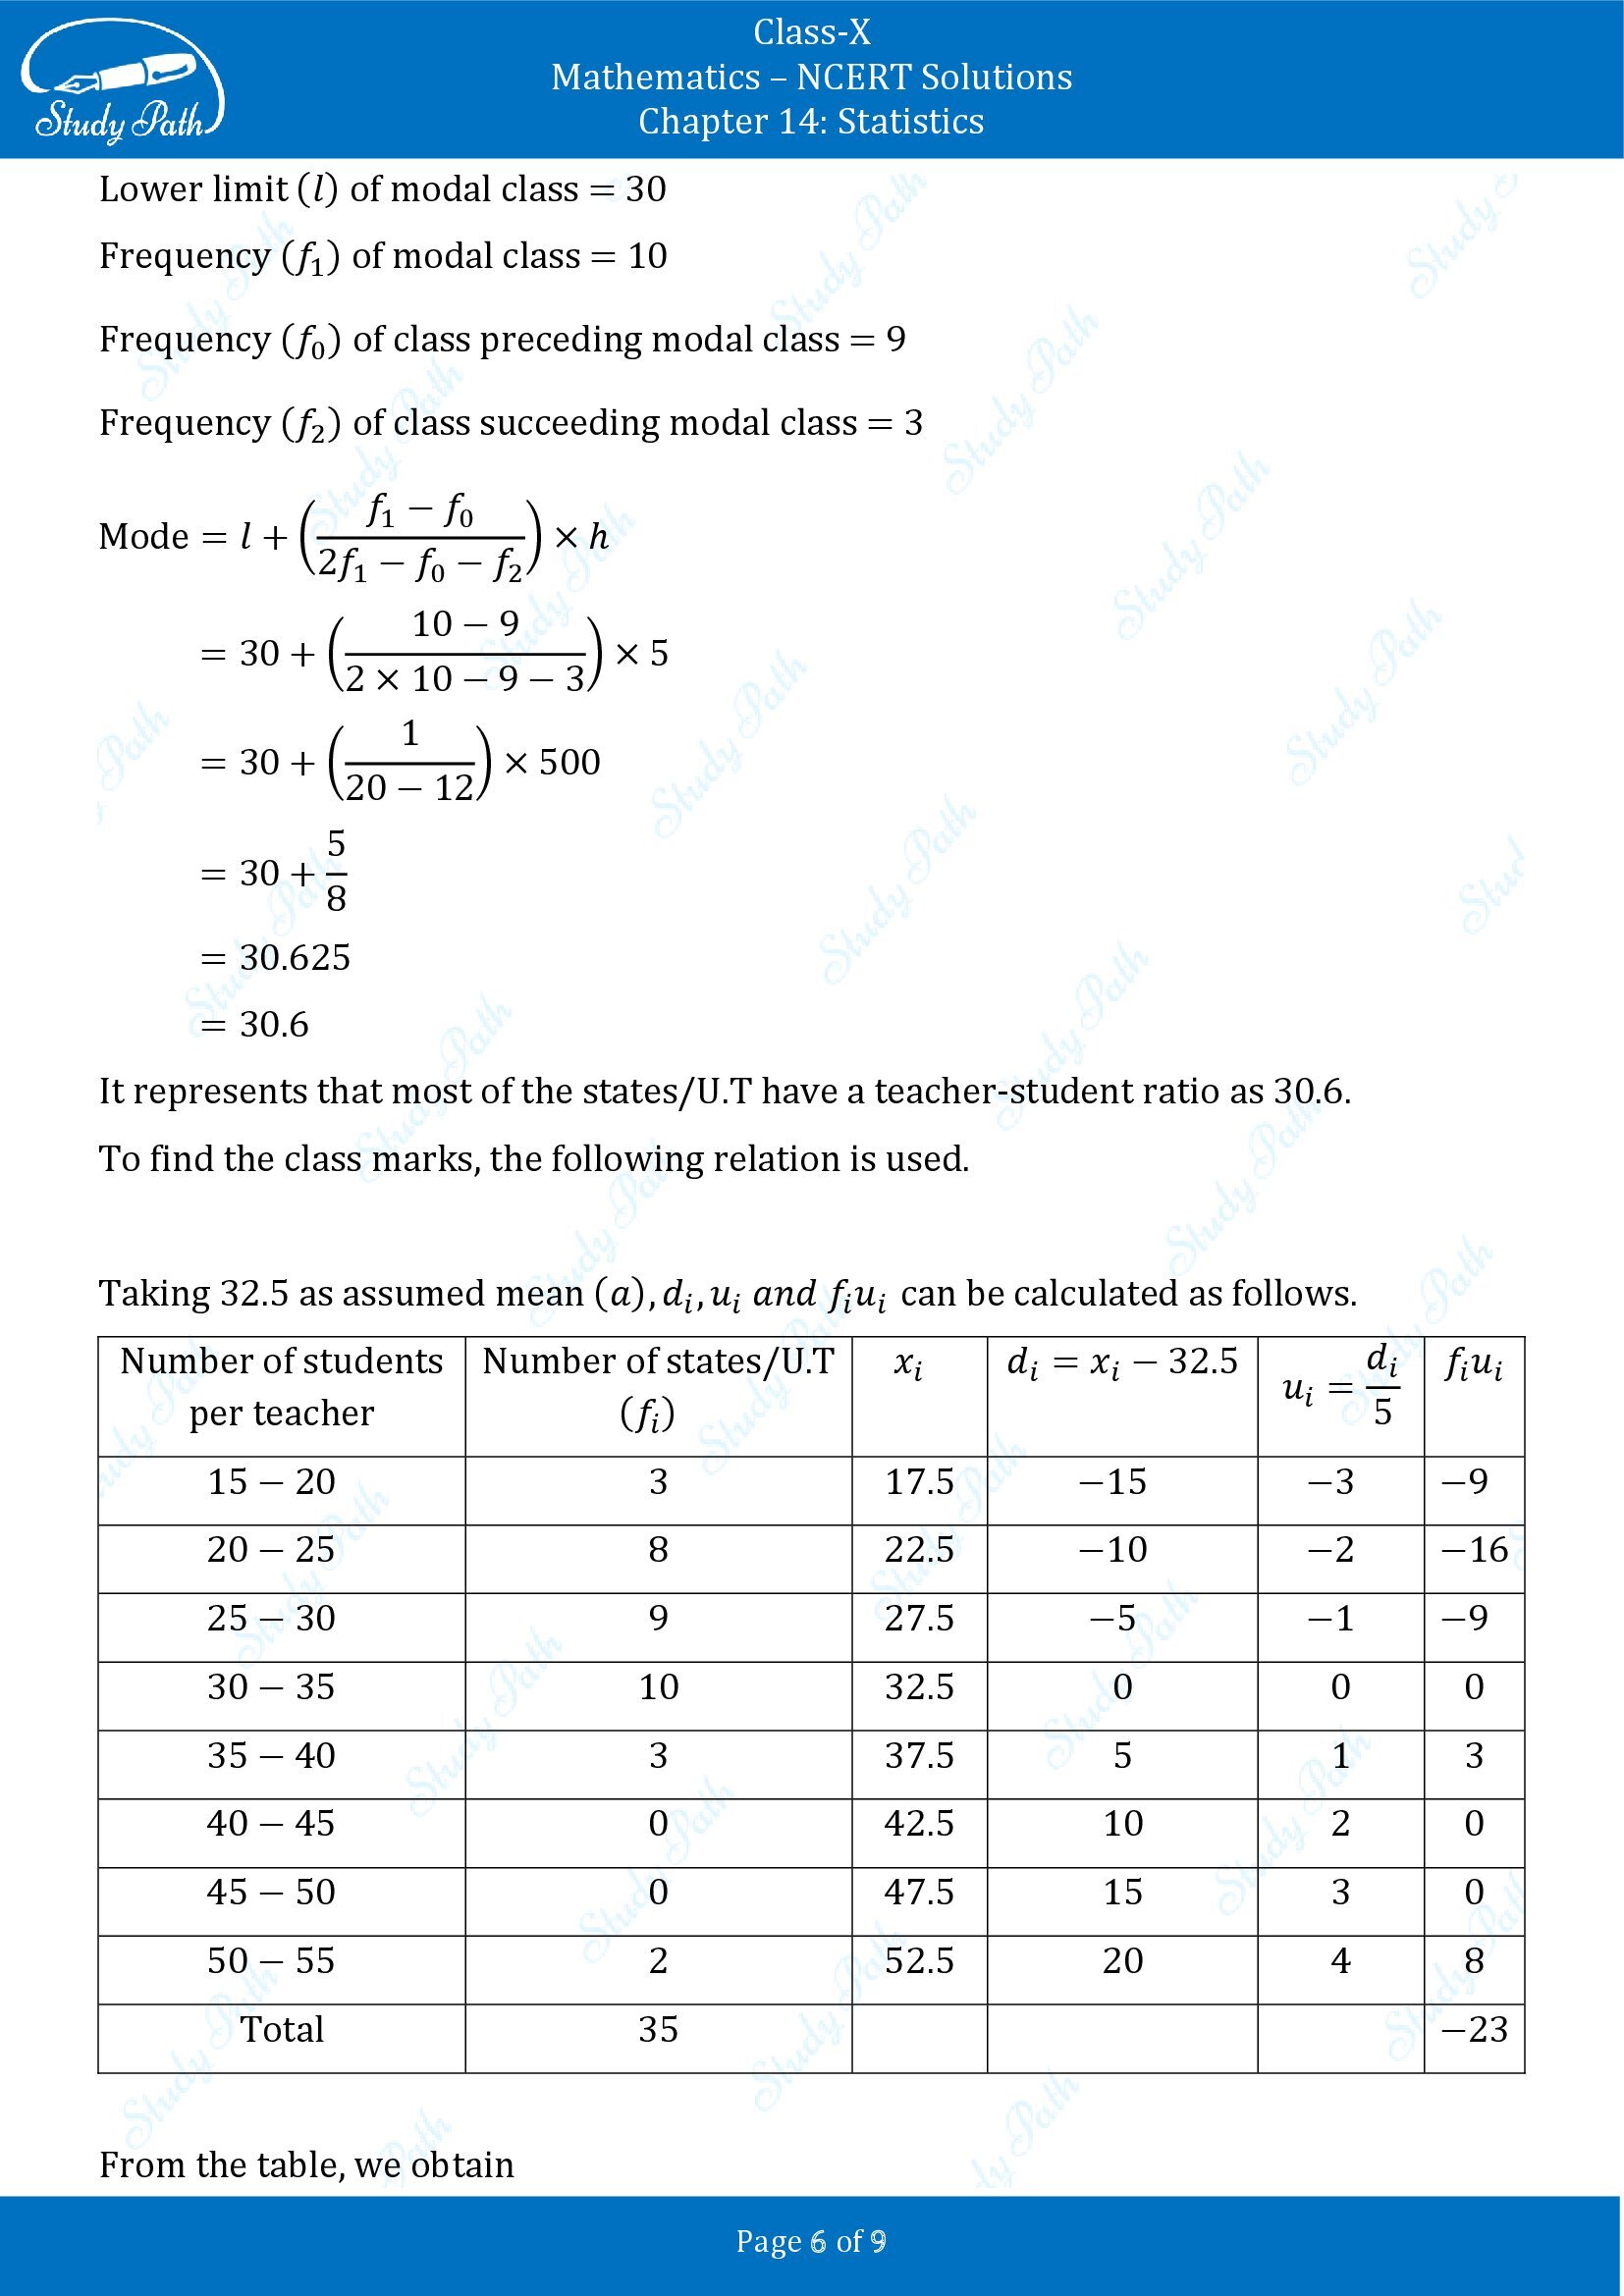 NCERT Solutions for Class 10 Maths Chapter 14 Statistics Exercise 14.2 00006